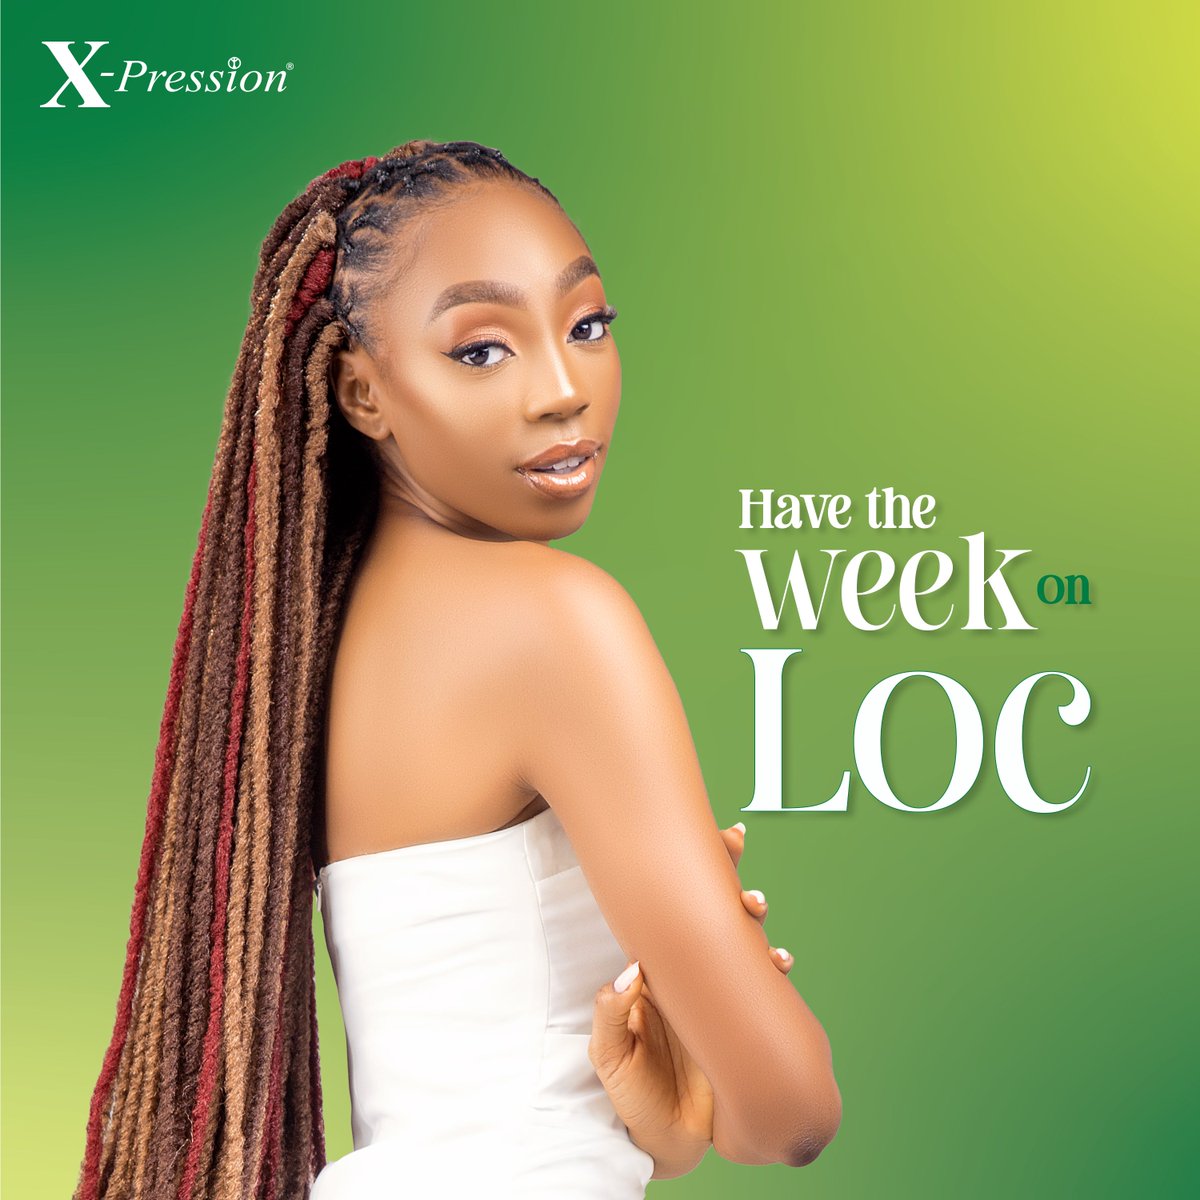 Embracing the week ahead, one 'Loc' at a time. Let's find joy in the little moments and seize each day with purpose and positivity. Here's to a week filled with opportunities, growth, and meaningful connections. 🌱 #xpressionhair #monday #newweek #BahamaLoc